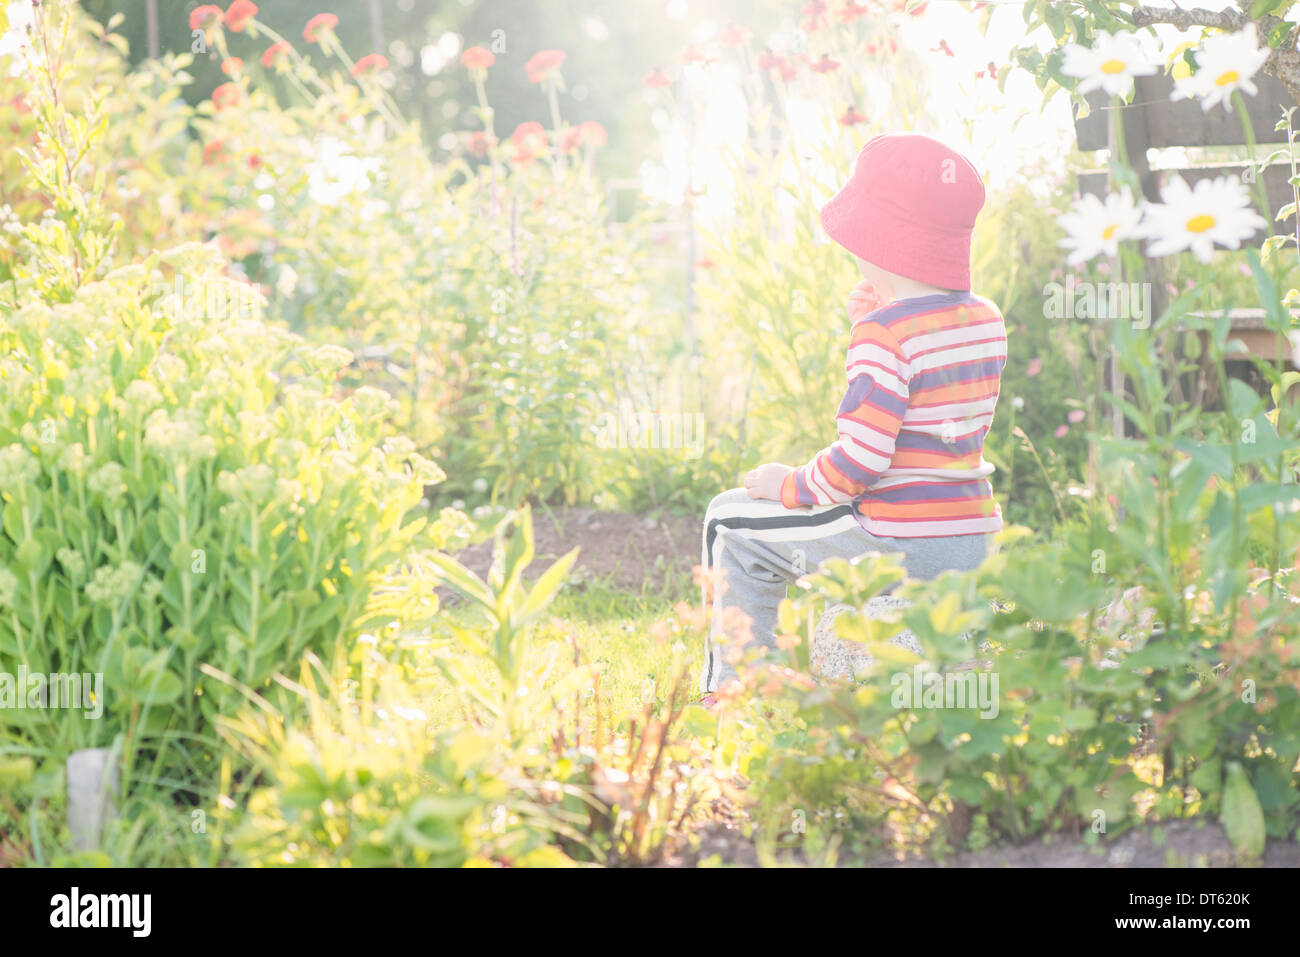 Tranquil summer scene. Young girl sitting in garden, watching plants and flowers. Stock Photo